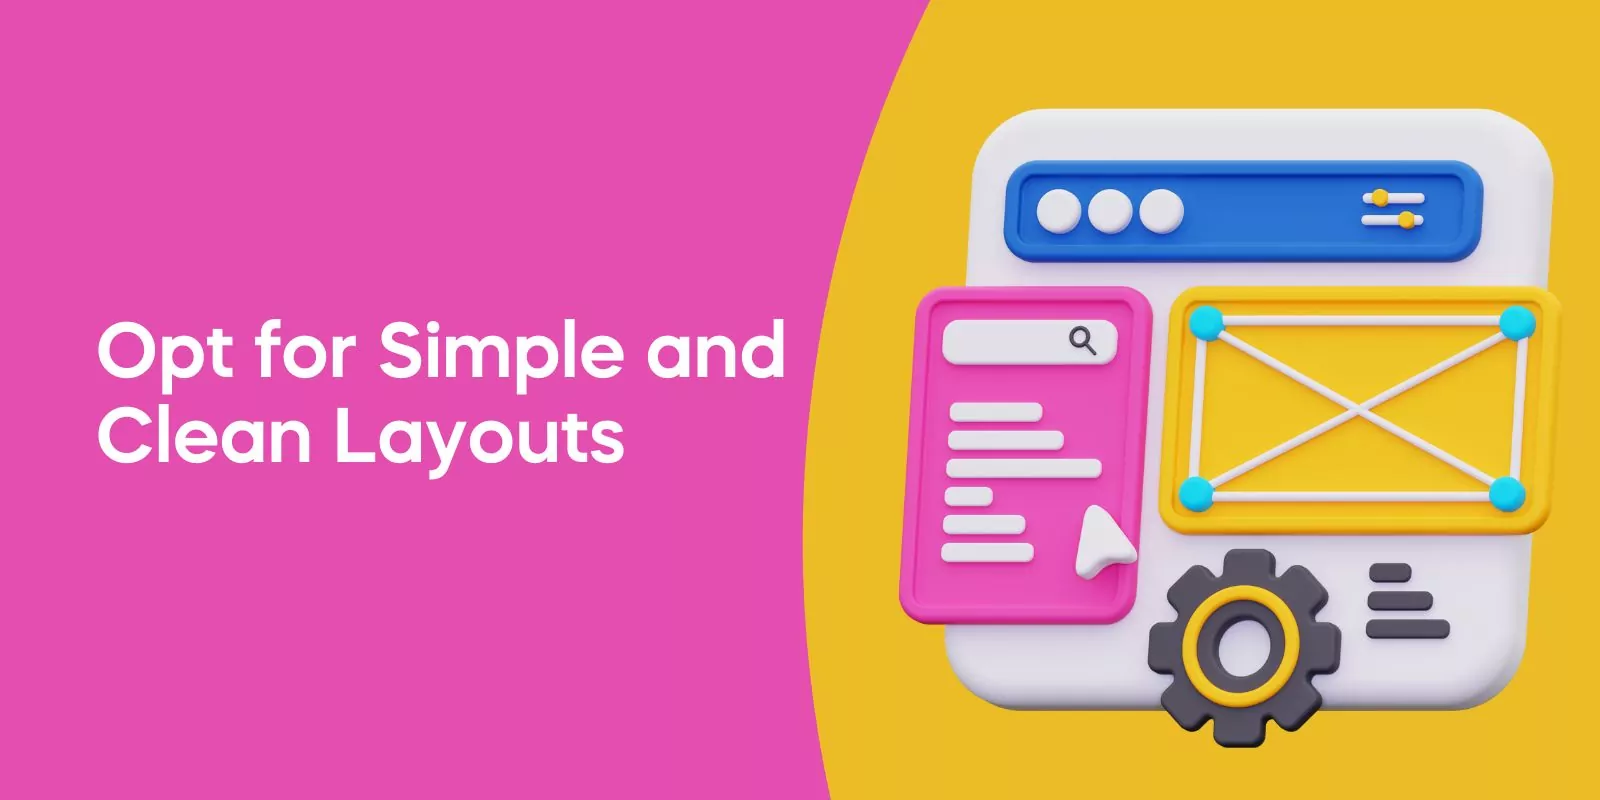 Opt for Simple and Clean Layouts